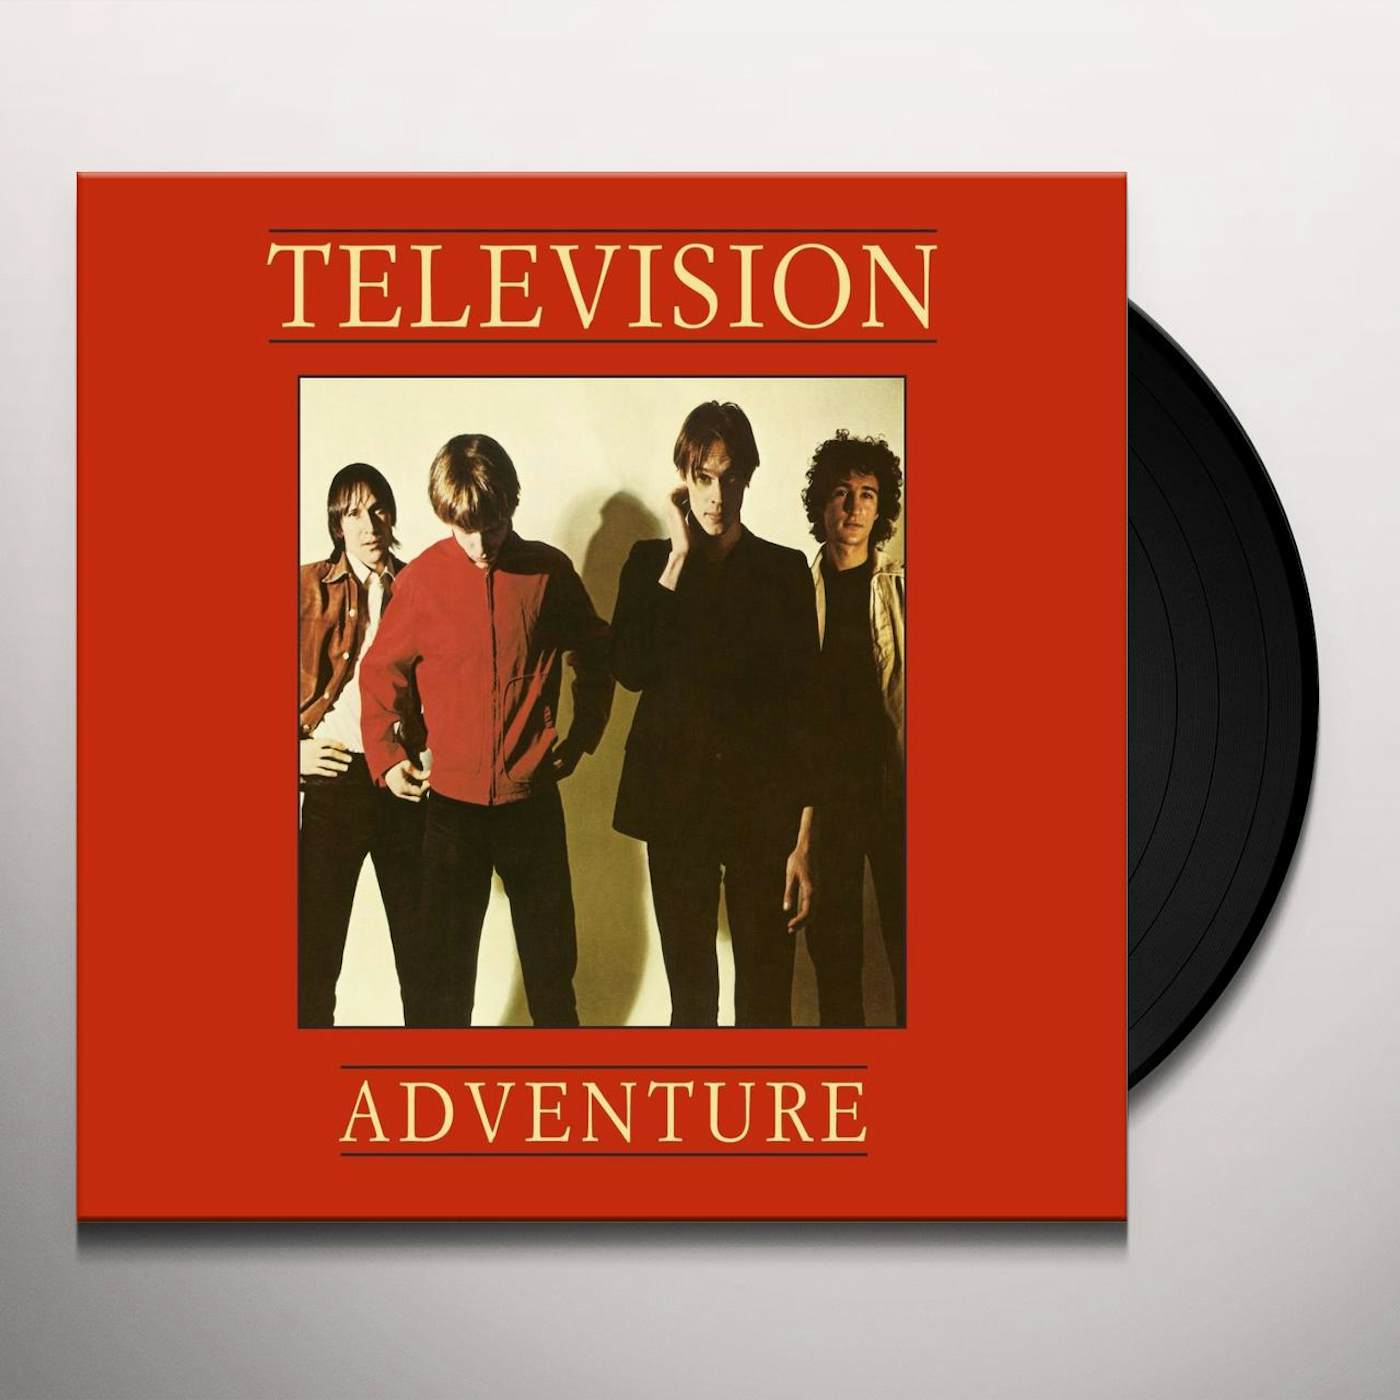 Television - Marquee Moon LP - Sealed Colored Vinyl Album - NEW PUNK RECORD